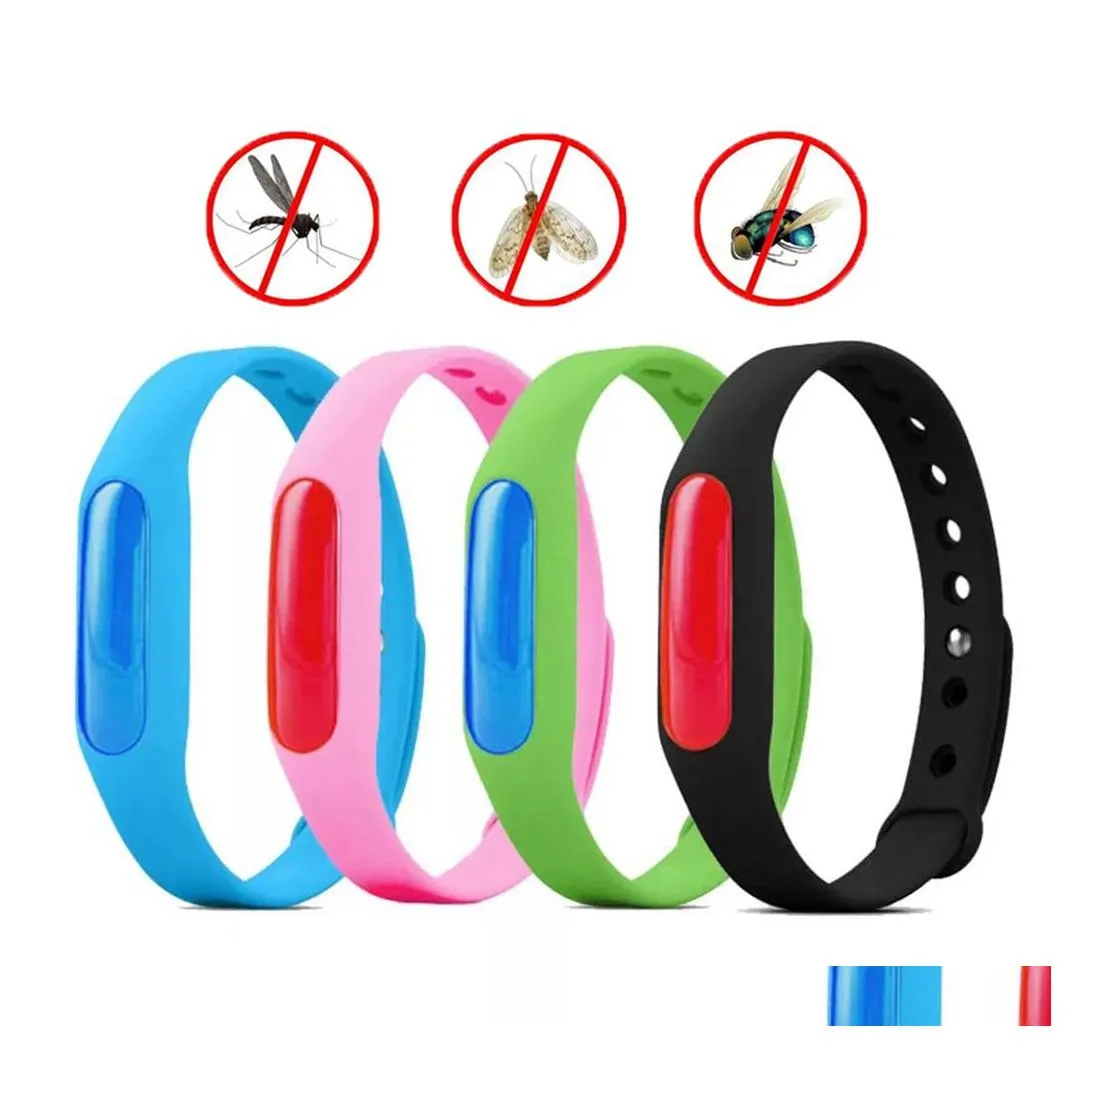 Pest Control Kid Mosquito Repellent Bracelet Sile Wristband Summer Plant Essential Oil Capse Band Bug Killer Drop Delivery Home Gard Othco